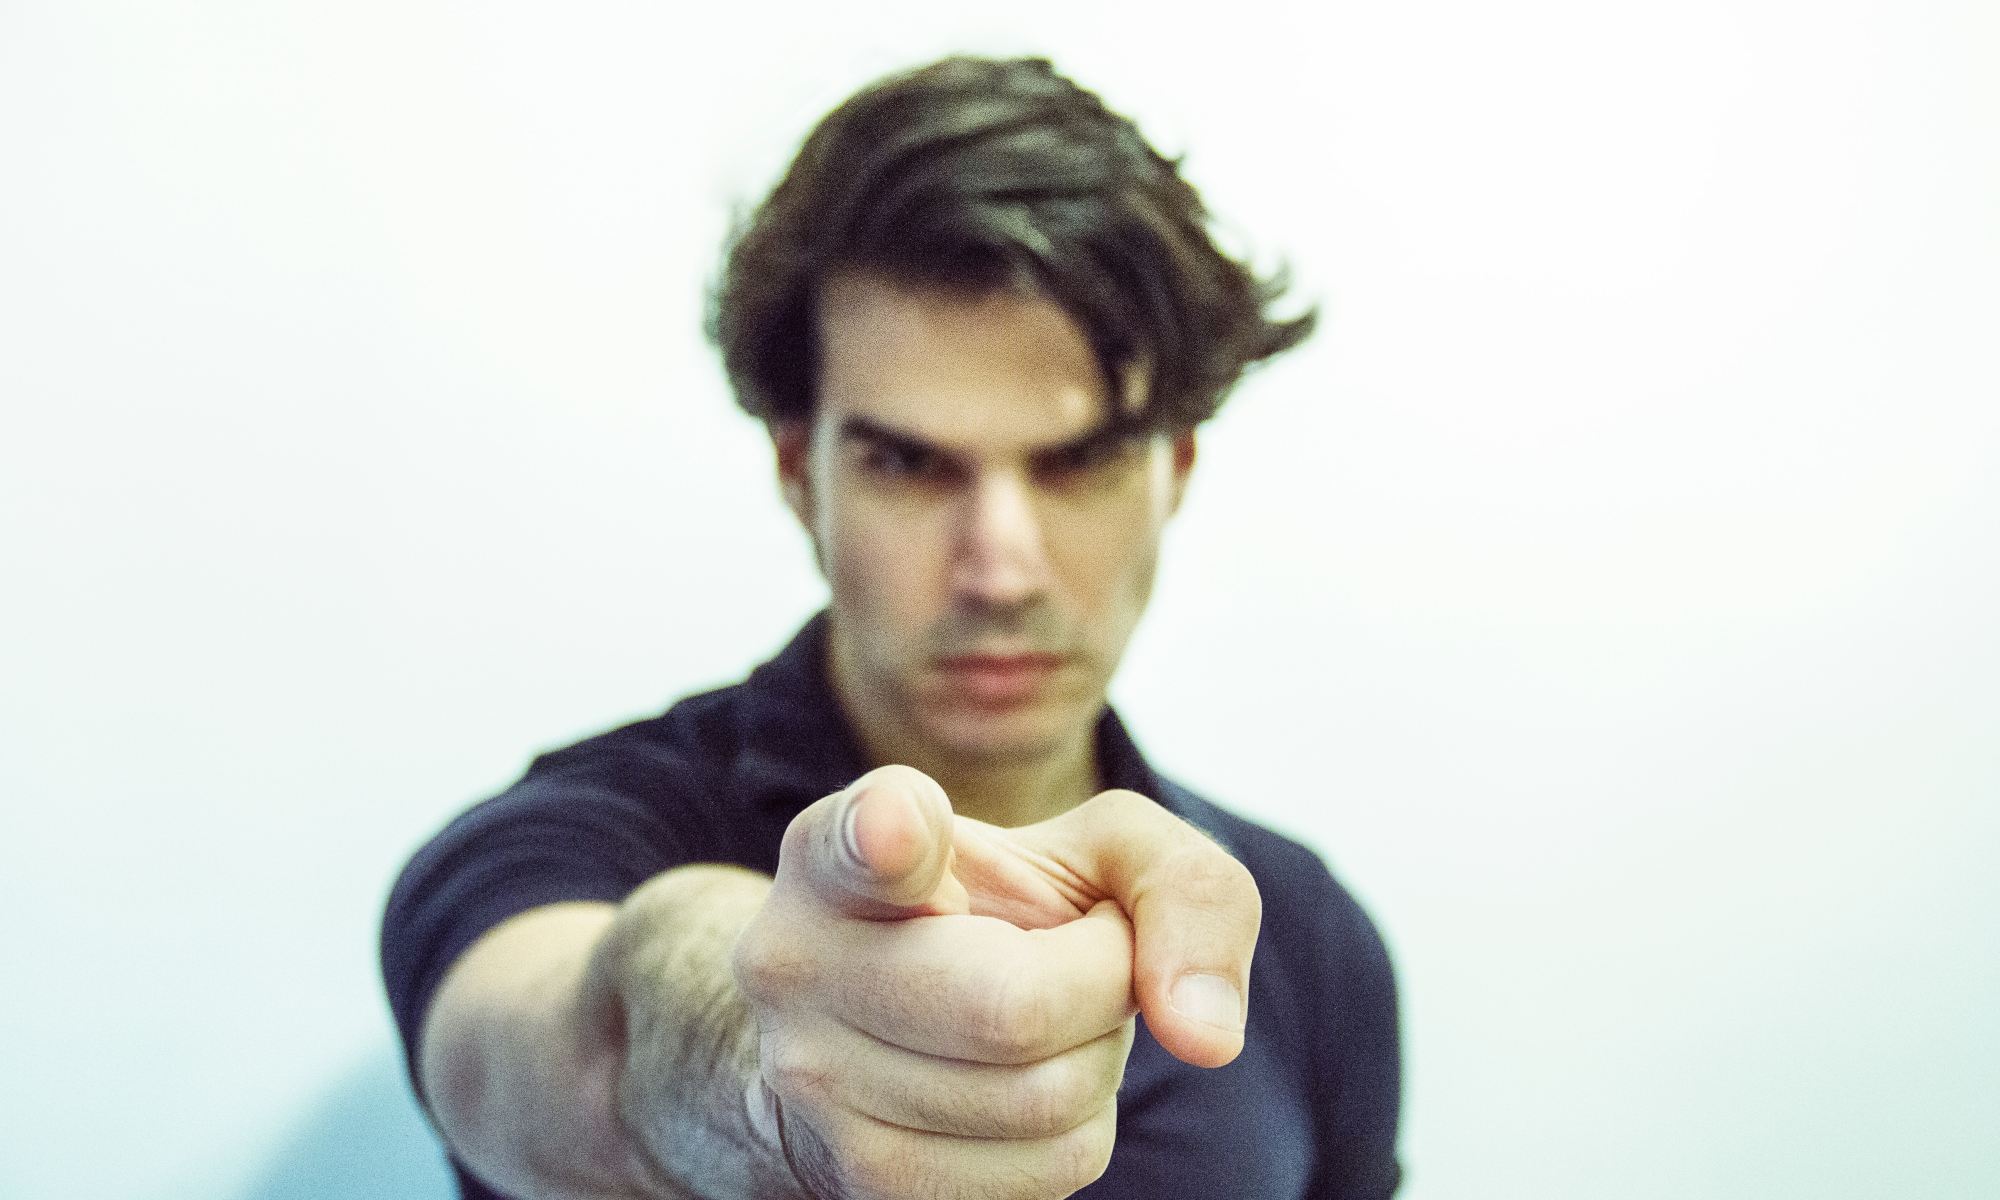 Man blaming someone else by pointing finger at them